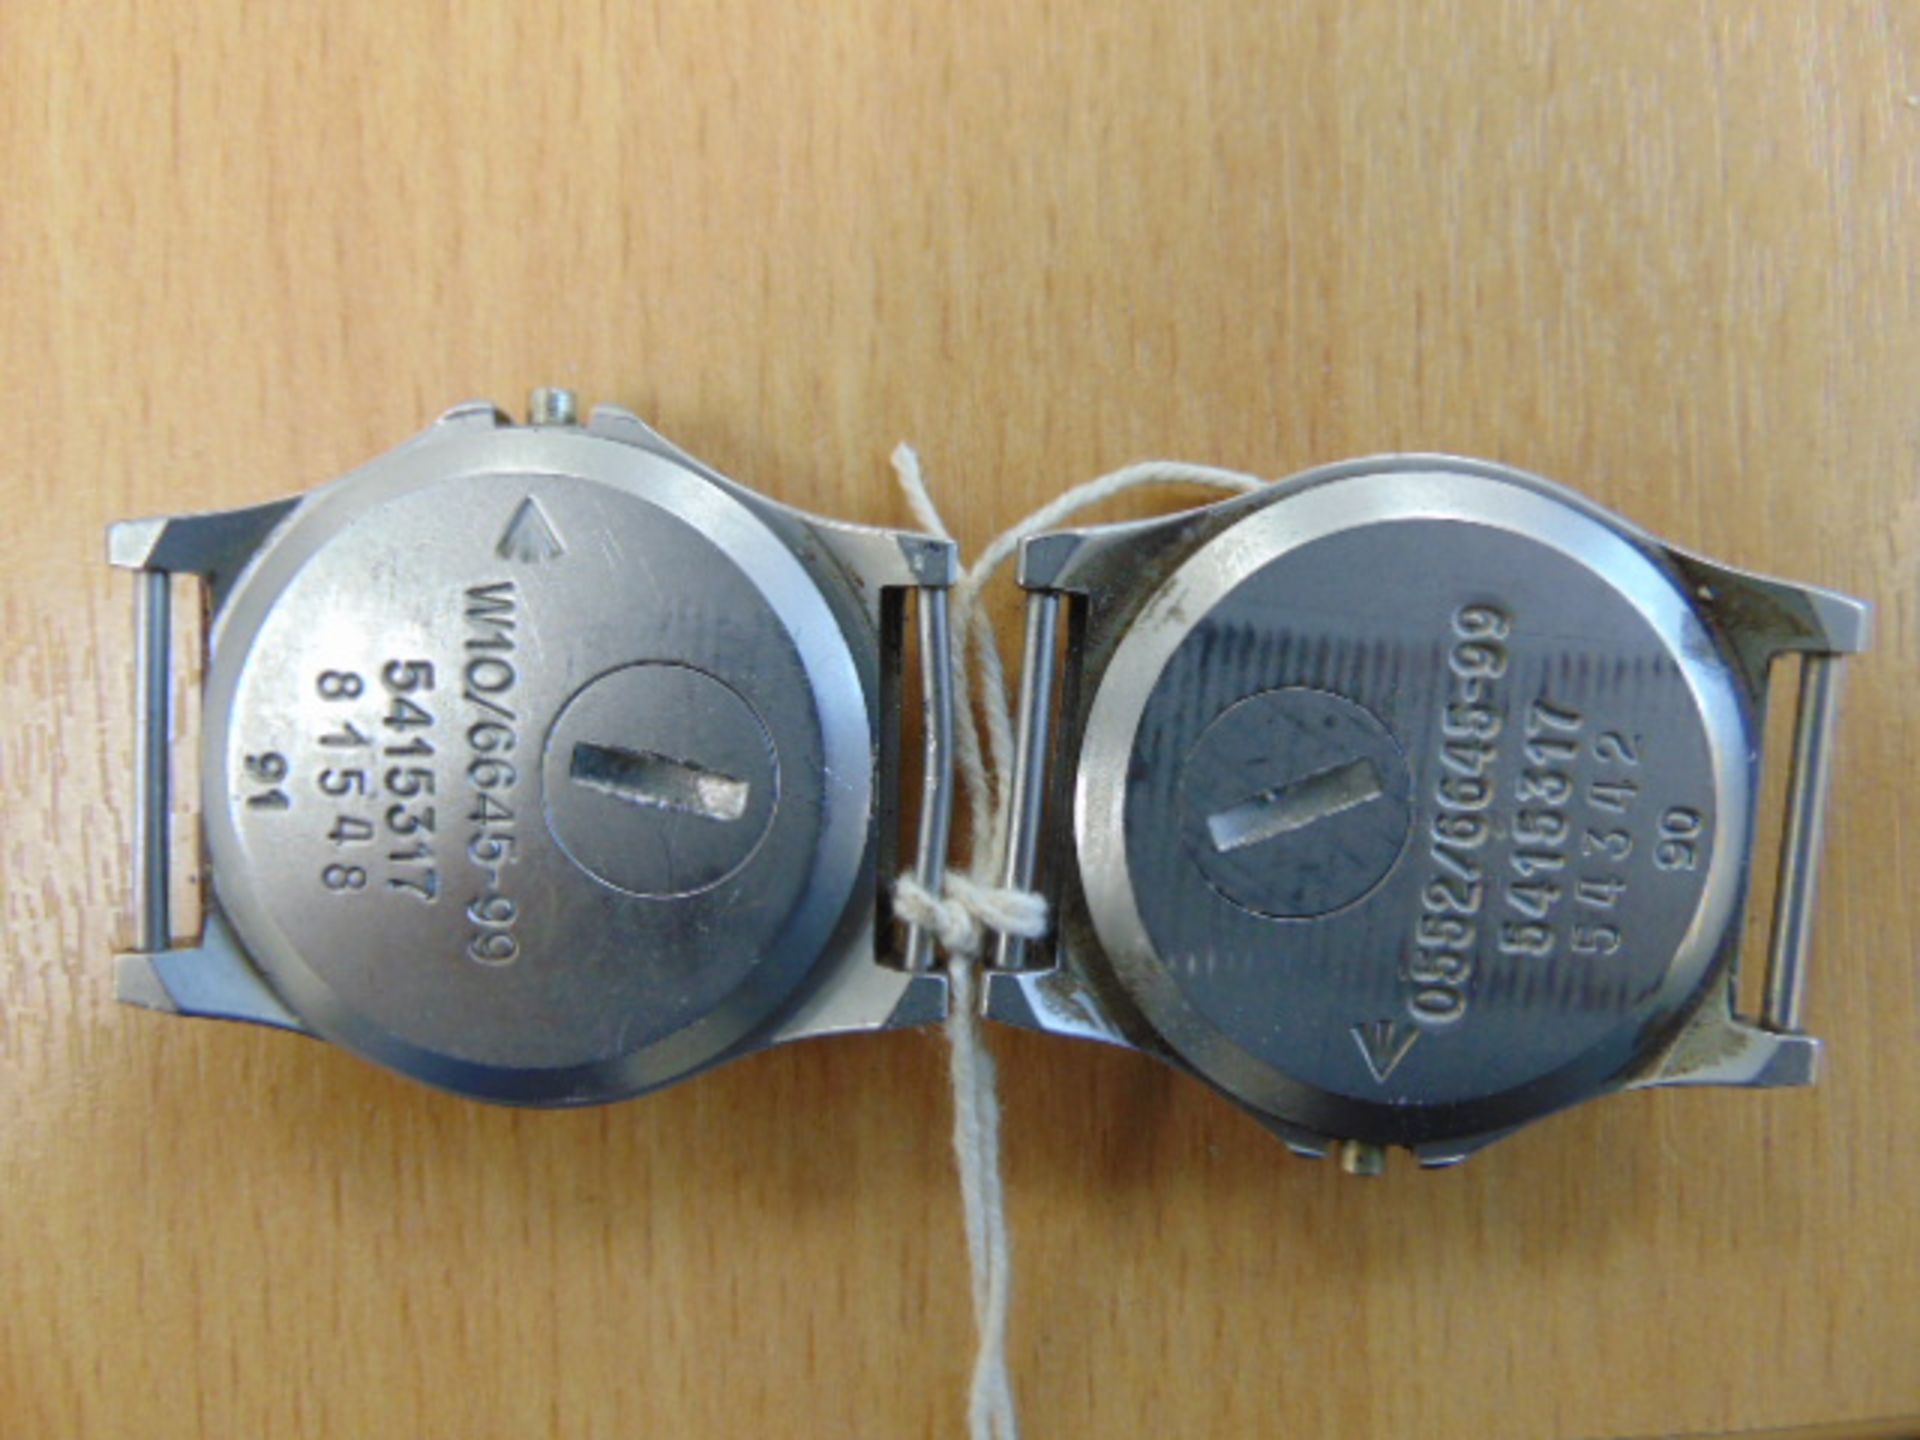 2X CWC WATCHES DATED 1990/1991 - Image 3 of 8